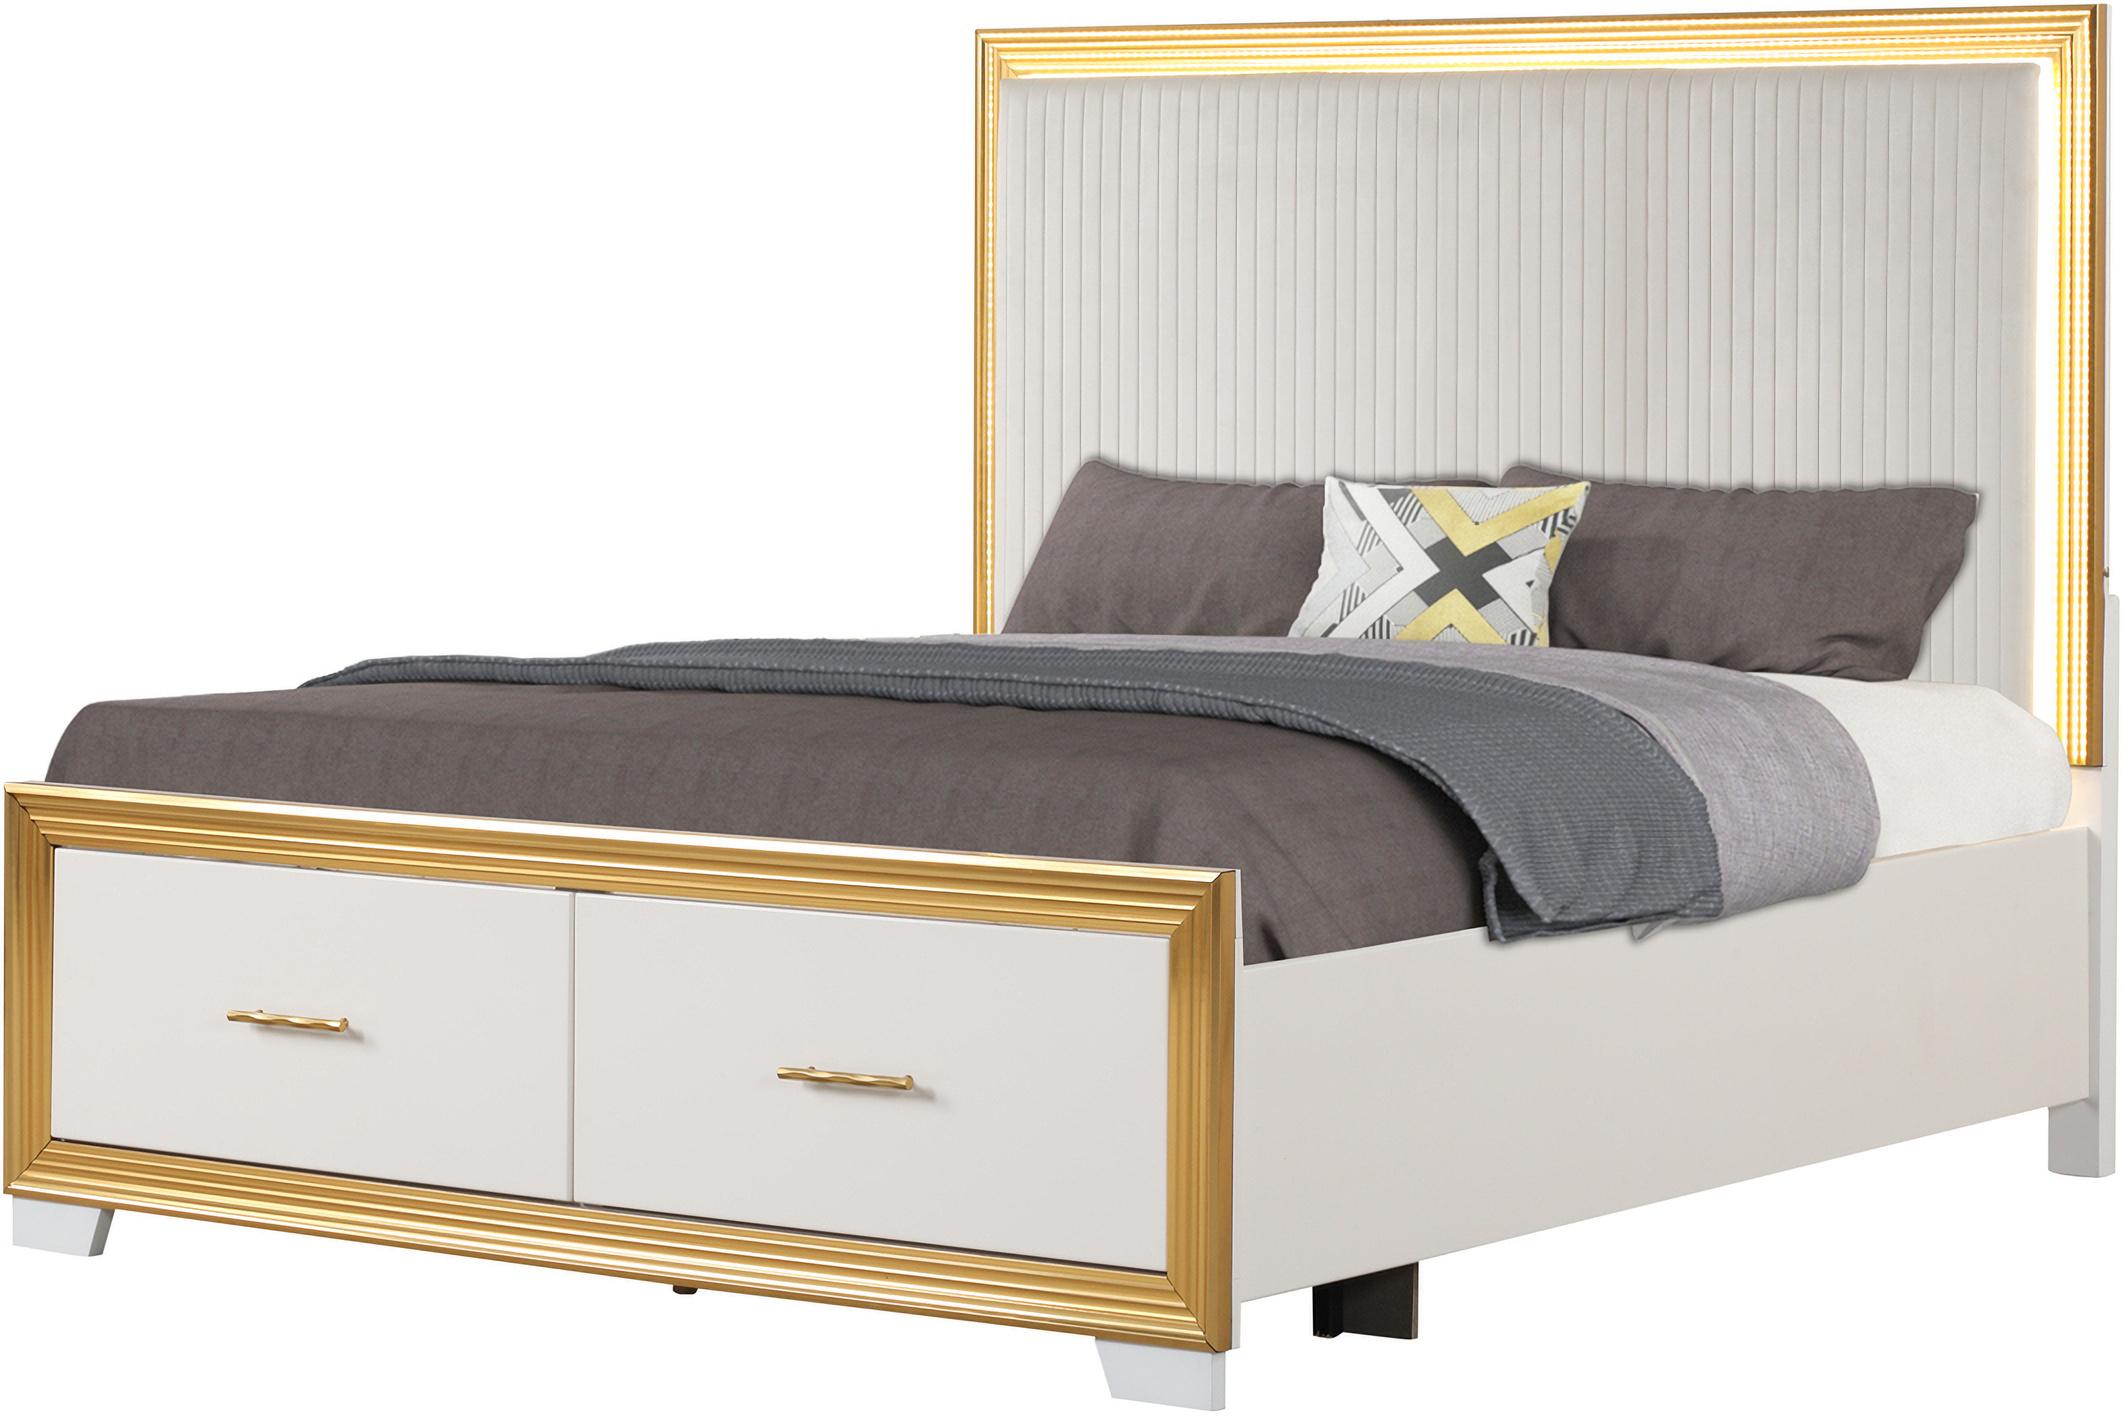 Contemporary, Modern Storage Bed Obsession Obsession-EK in White Fabric